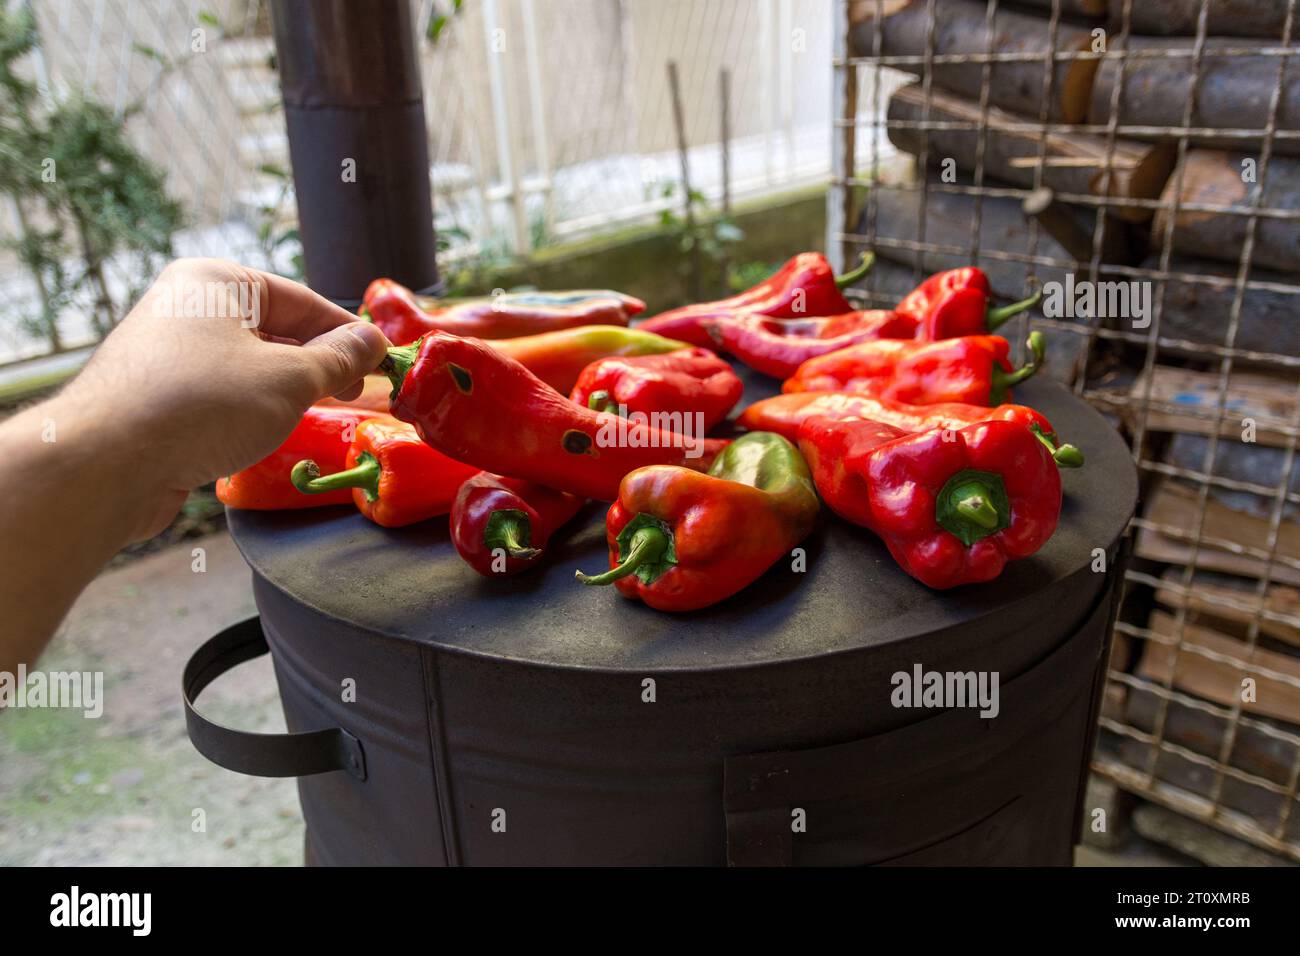 Baking red peppers on an old wood fired stove outdoors in the yard on an autumn day. A hand turns the peppers. Concept of preparing ajvar Stock Photo